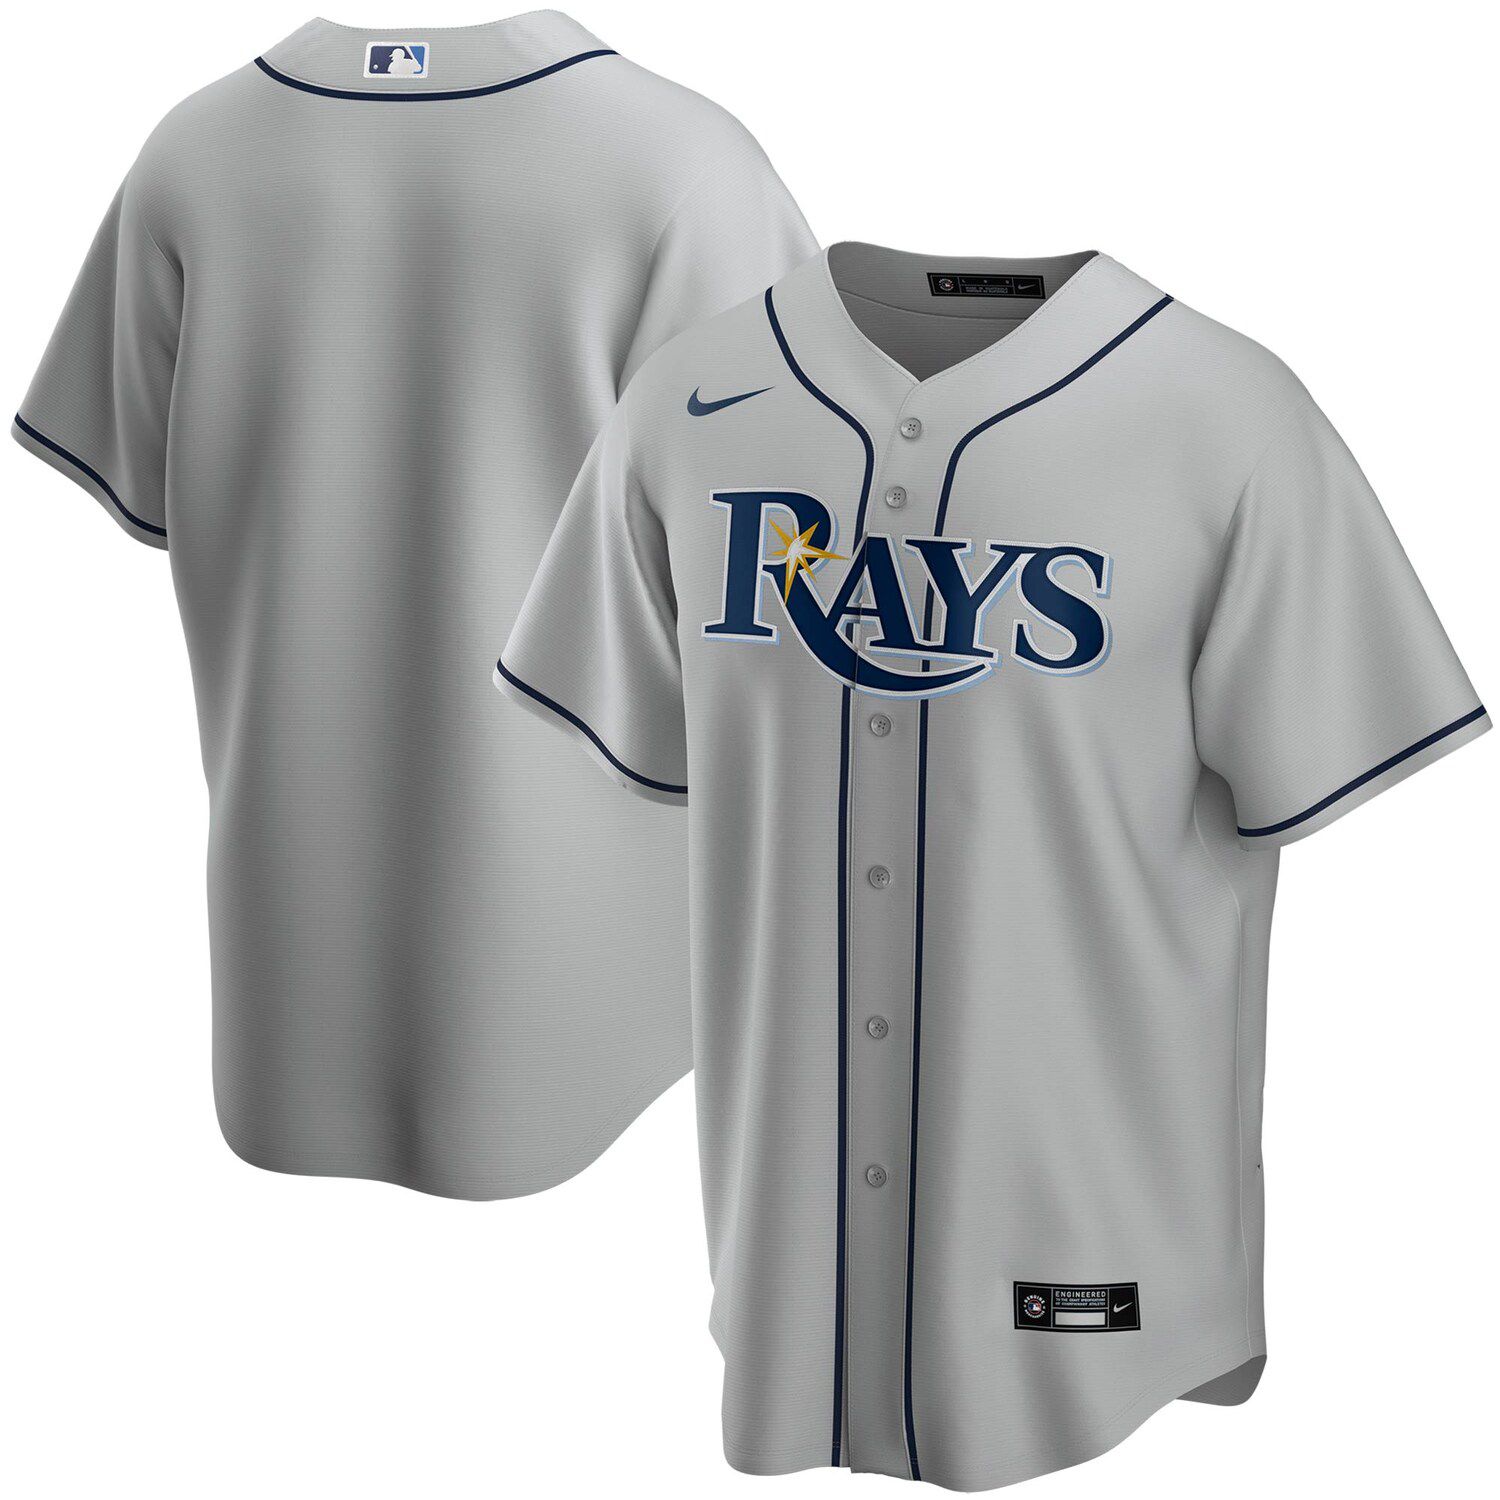 tampa bay rays jersey 2020